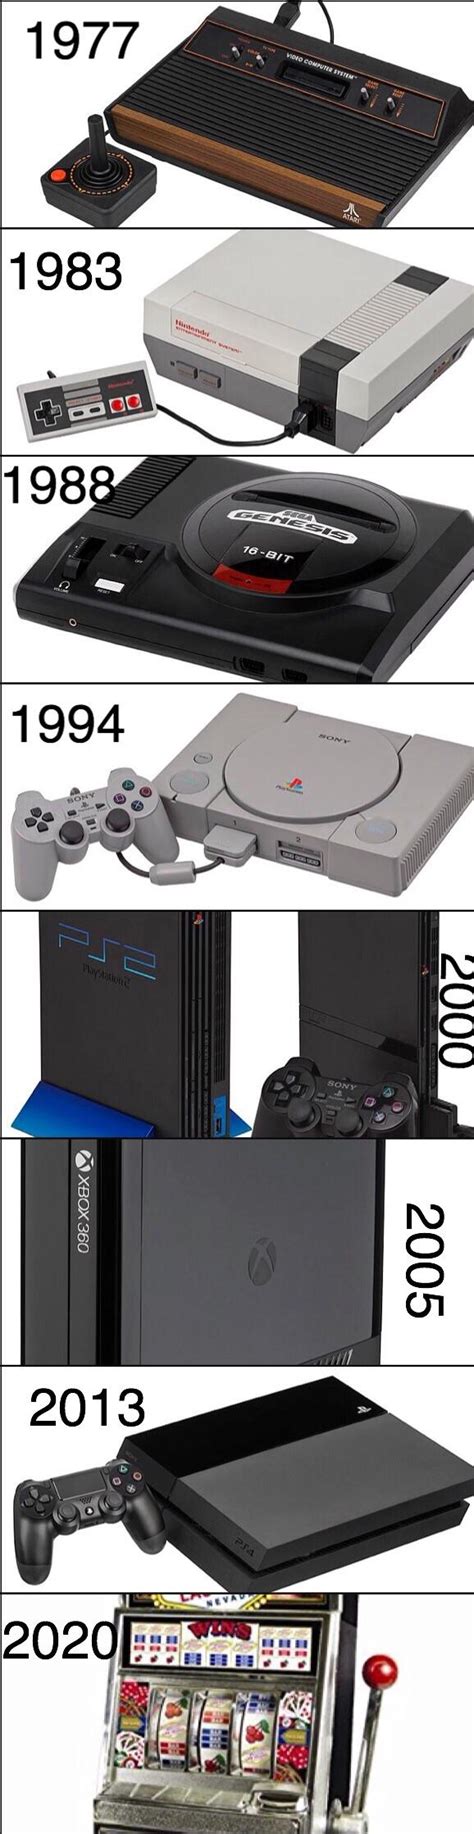 The Evolution Of Video Game Consoles Through The Years Rgaming